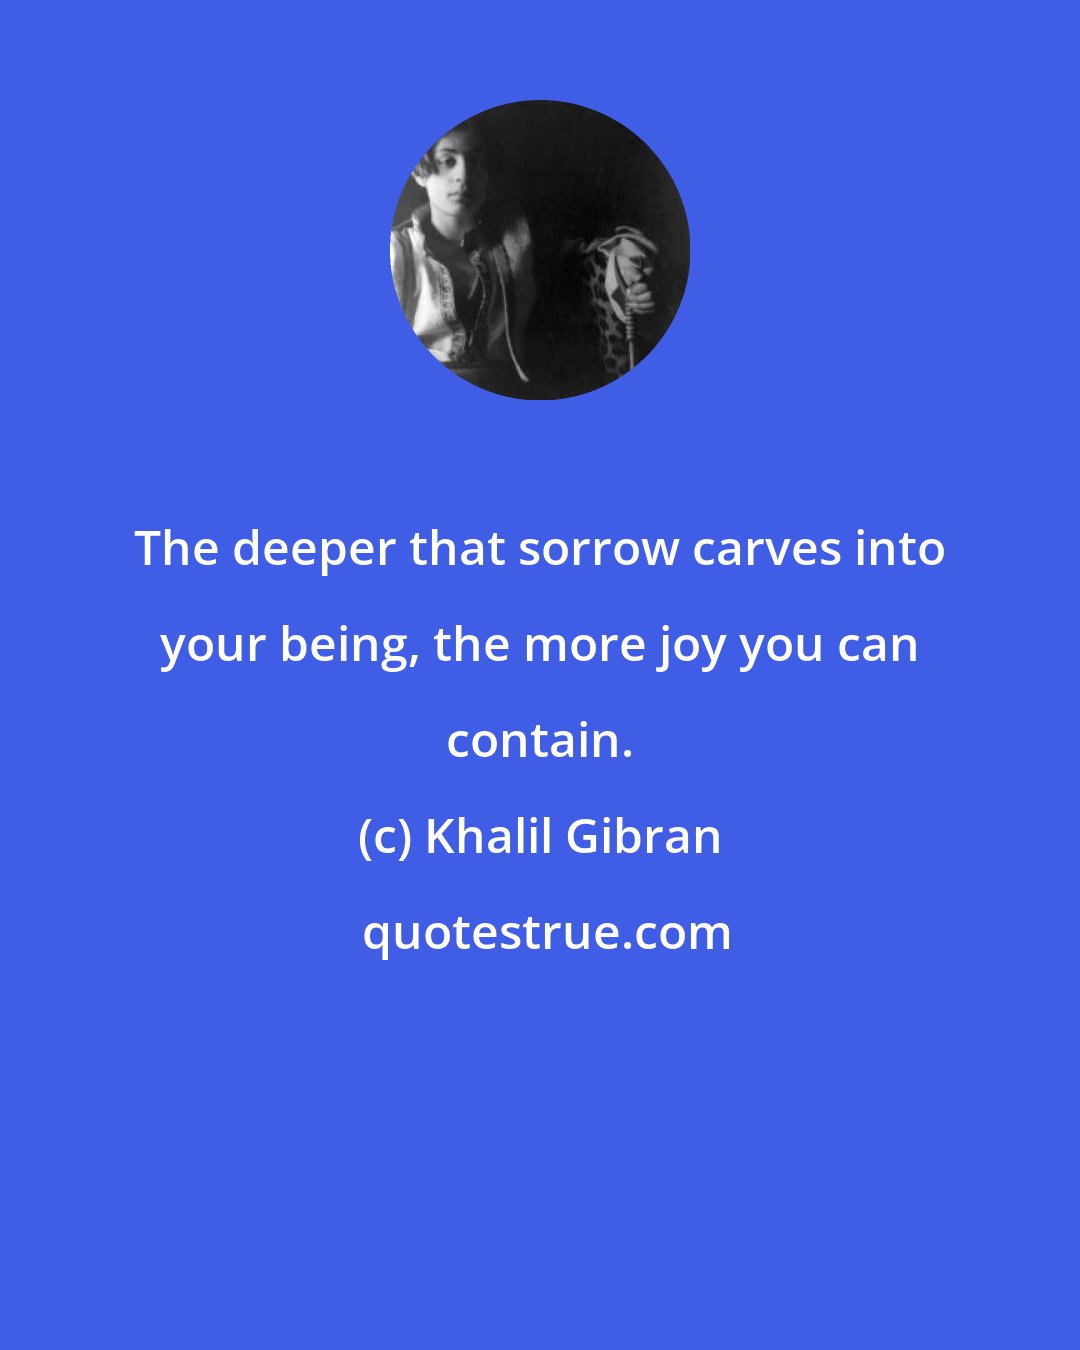 Khalil Gibran: The deeper that sorrow carves into your being, the more joy you can contain.